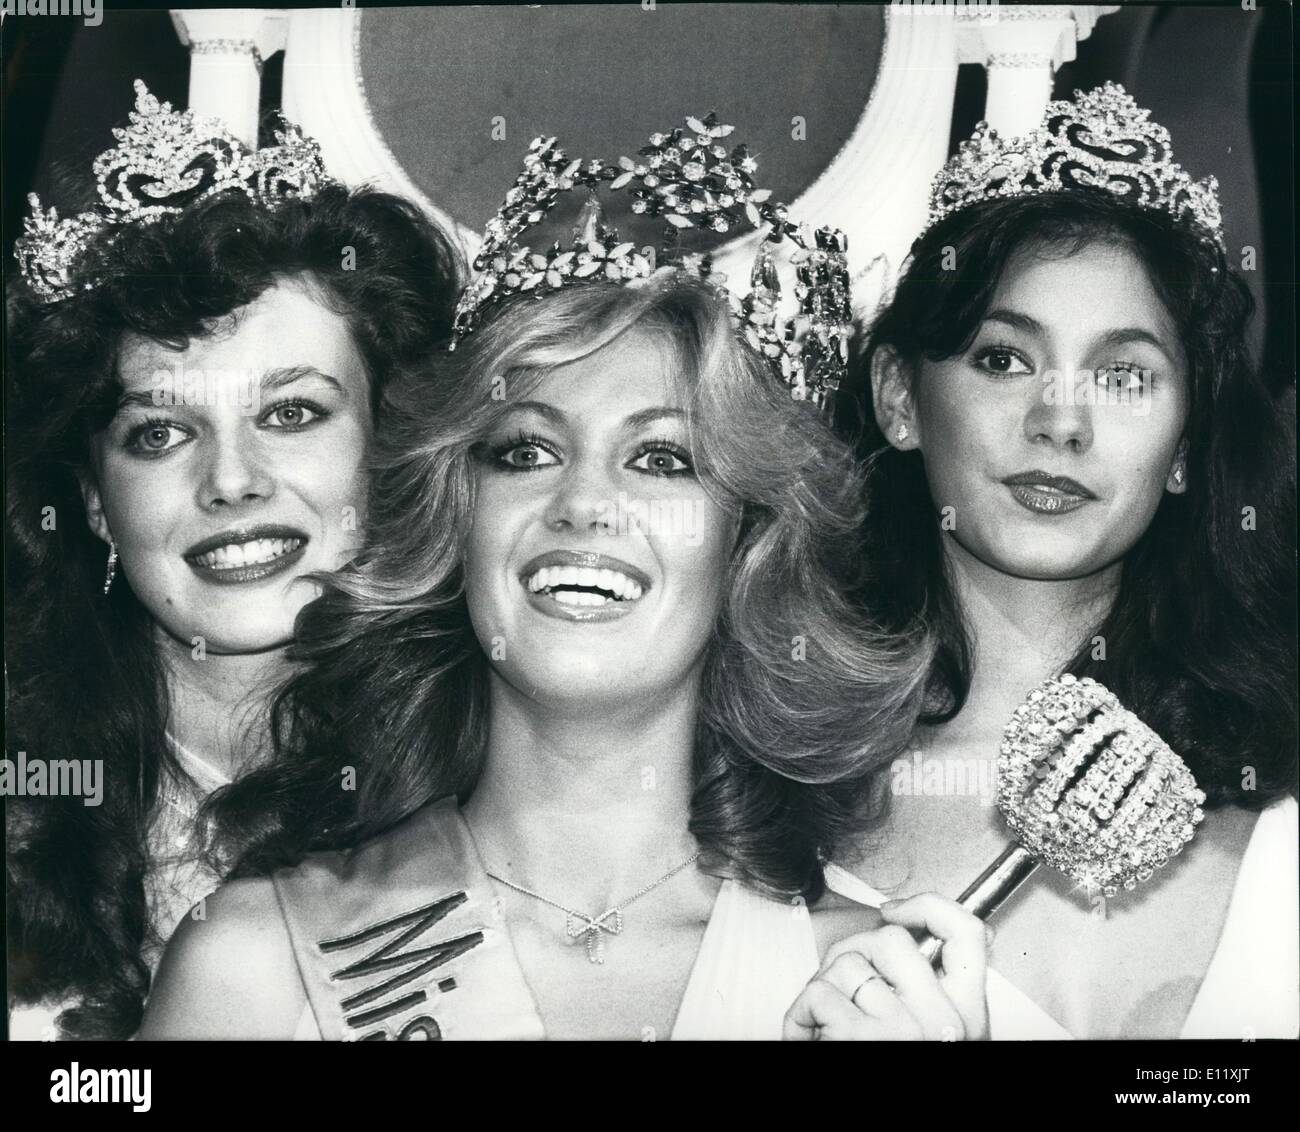 Nov. 11, 1980 - Miss Germany is the new Miss World: 18 year-old Gabriella Brum, Miss Germany, won the title of Miss World at London's Royal Albert Hall last night. Miss Guam, 19 year-old Kimberley Santos was second, and Miss France, 17 year-old Particia Barzyk was third, Gabriella Brum lives in Los Angeles with her 52 year-old boyfriend, Benno Bellenbaum, a film cameramen. Photo shows Seen after the crowning cremony, The new miss World, Gabriella Brum (Miss Germany, on her left runner-up Miss Gaum, and third Miss France. Stock Photo